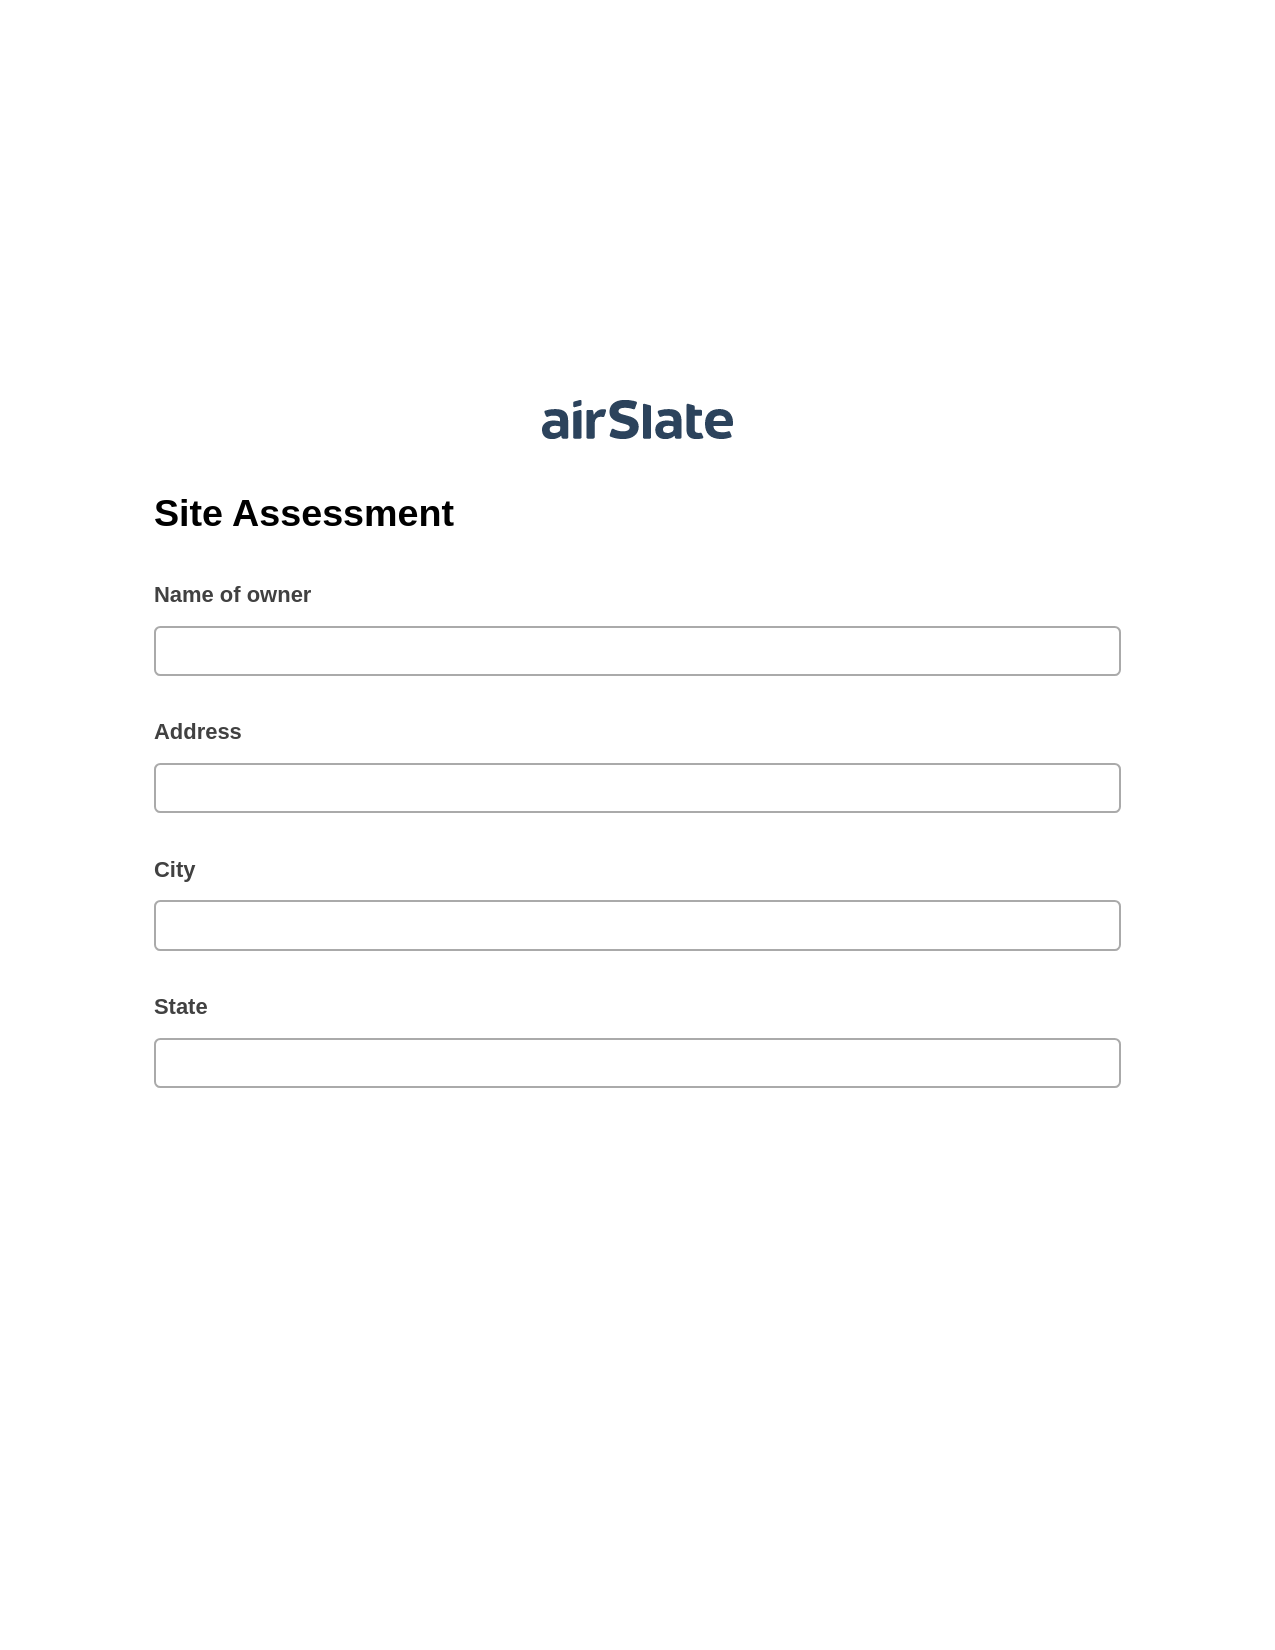 Site Assessment Pre-fill from CSV File Bot, Unassign Role Bot, Export to Salesforce Bot